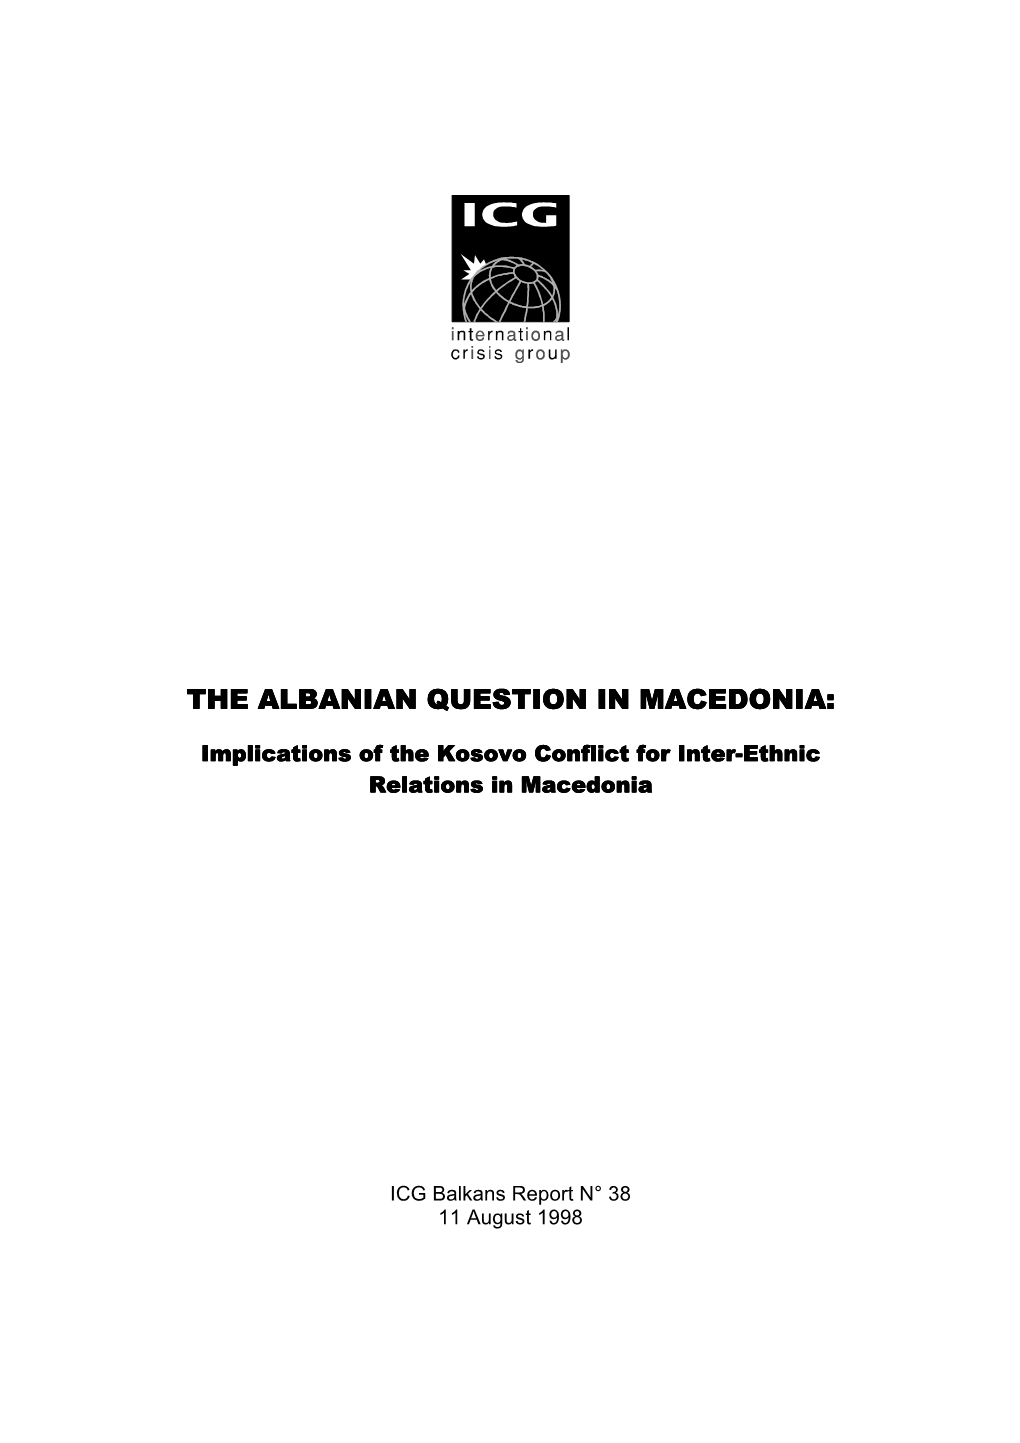 Europe Report, Nr. 38: the Albanian Question in Macedonia